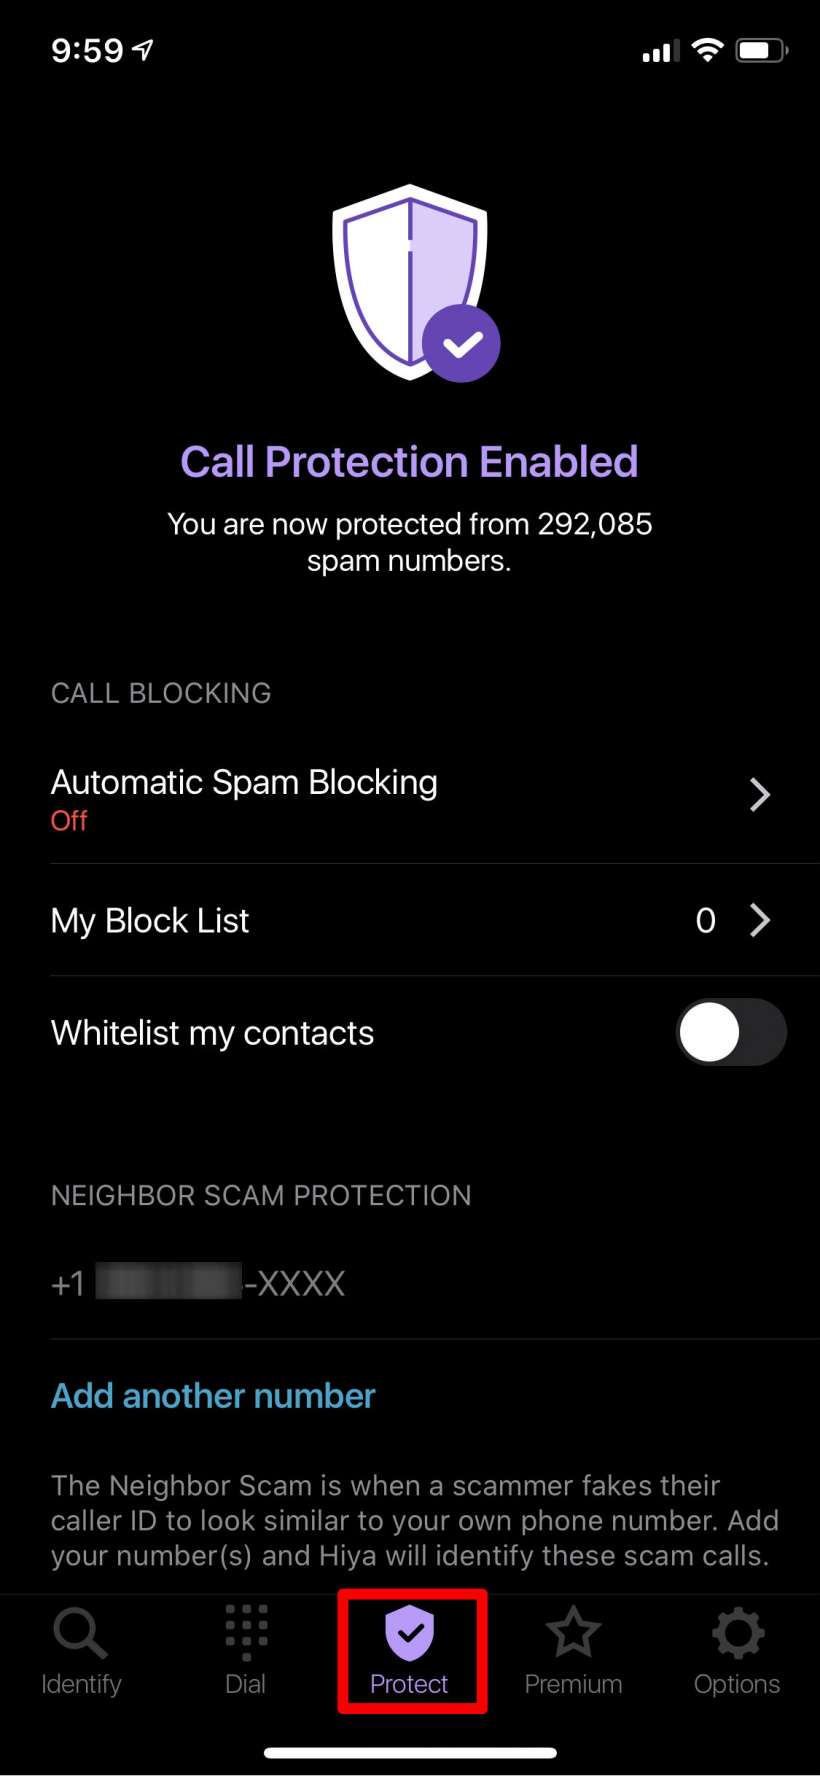 How to block neighbor scam spam calls on iPhone.